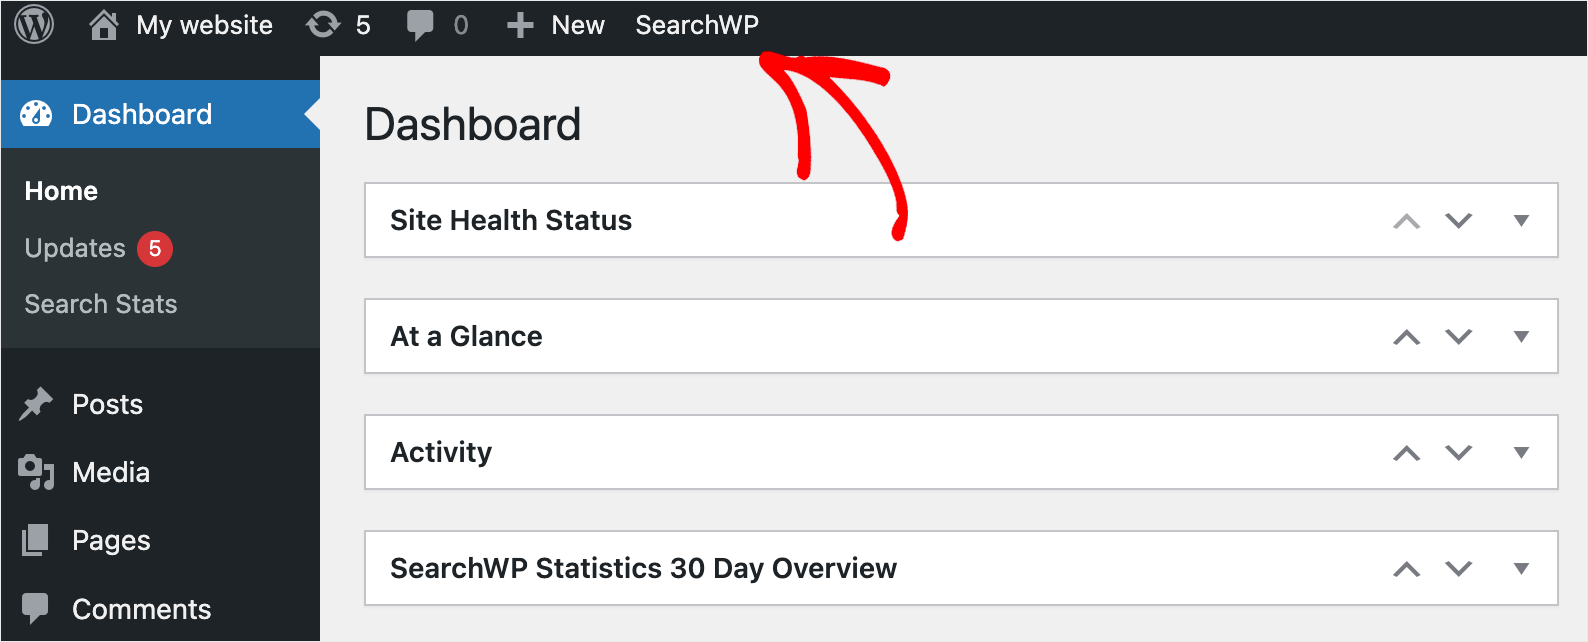 go to the SearchWP settings